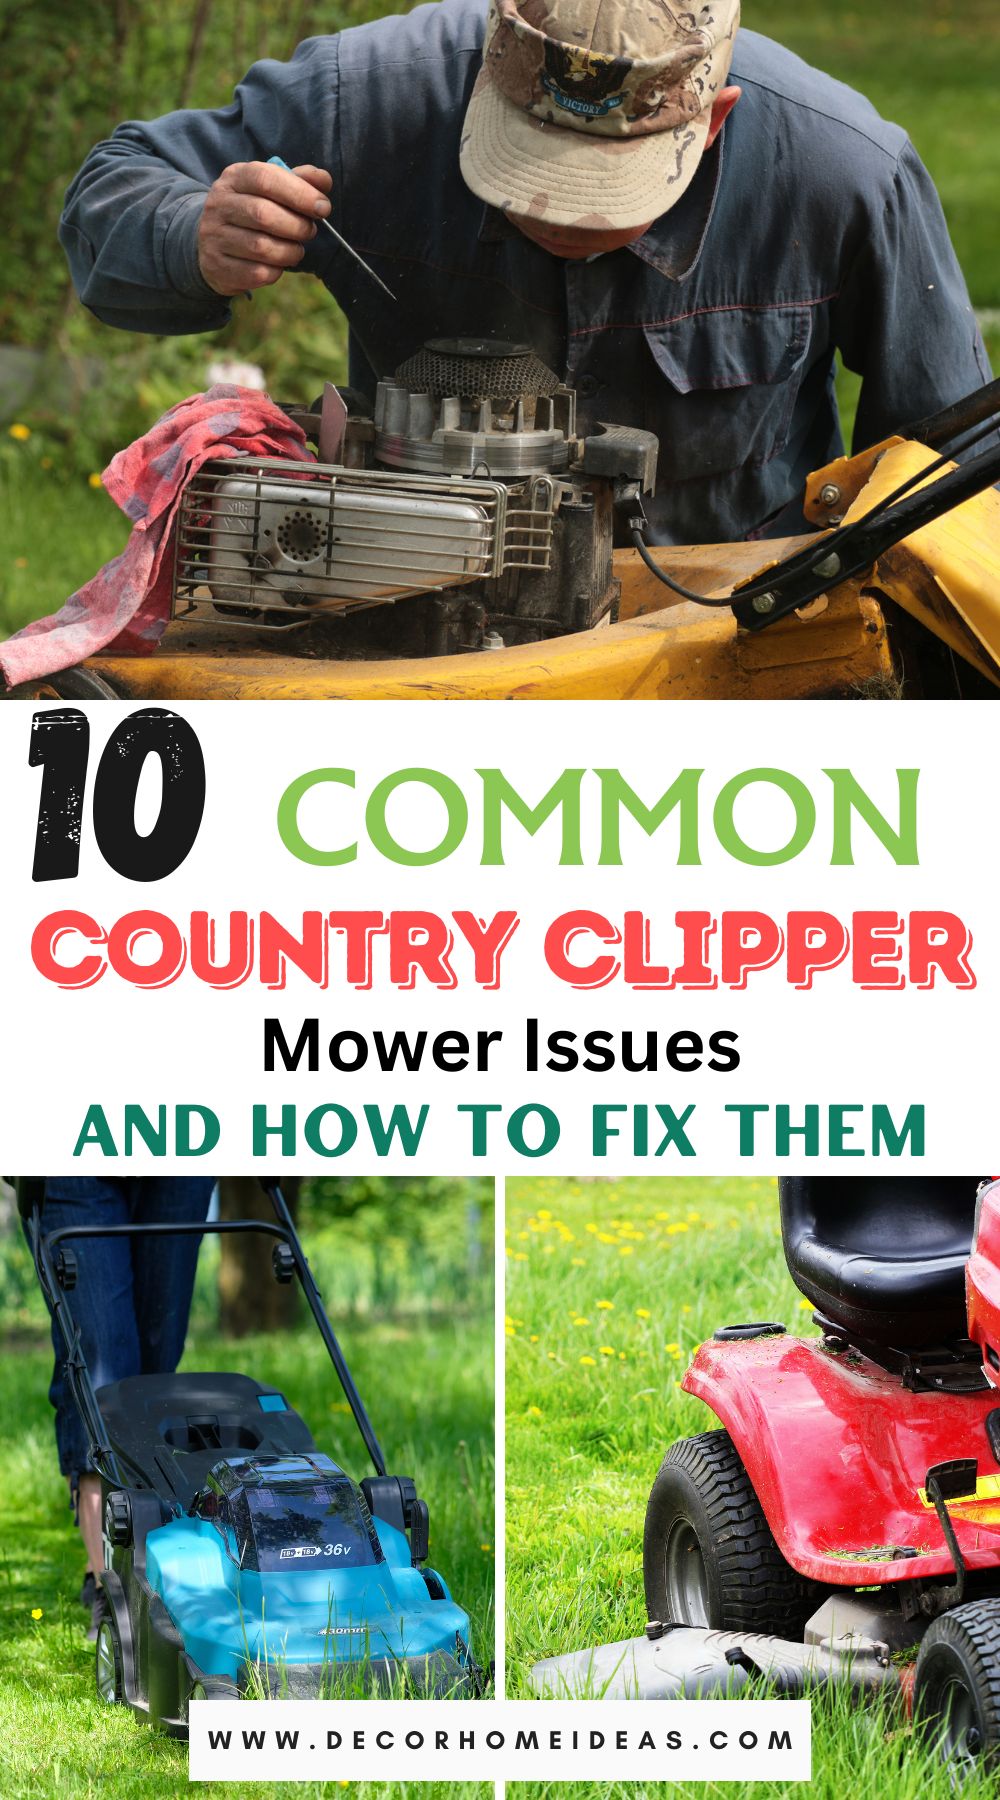 Tackle mower troubles with confidence using our guide to the 10 common issues faced by Country Clipper mowers and their effective solutions. Keep your lawn care routine running smoothly with expert tips for addressing and preventing these common challenges.